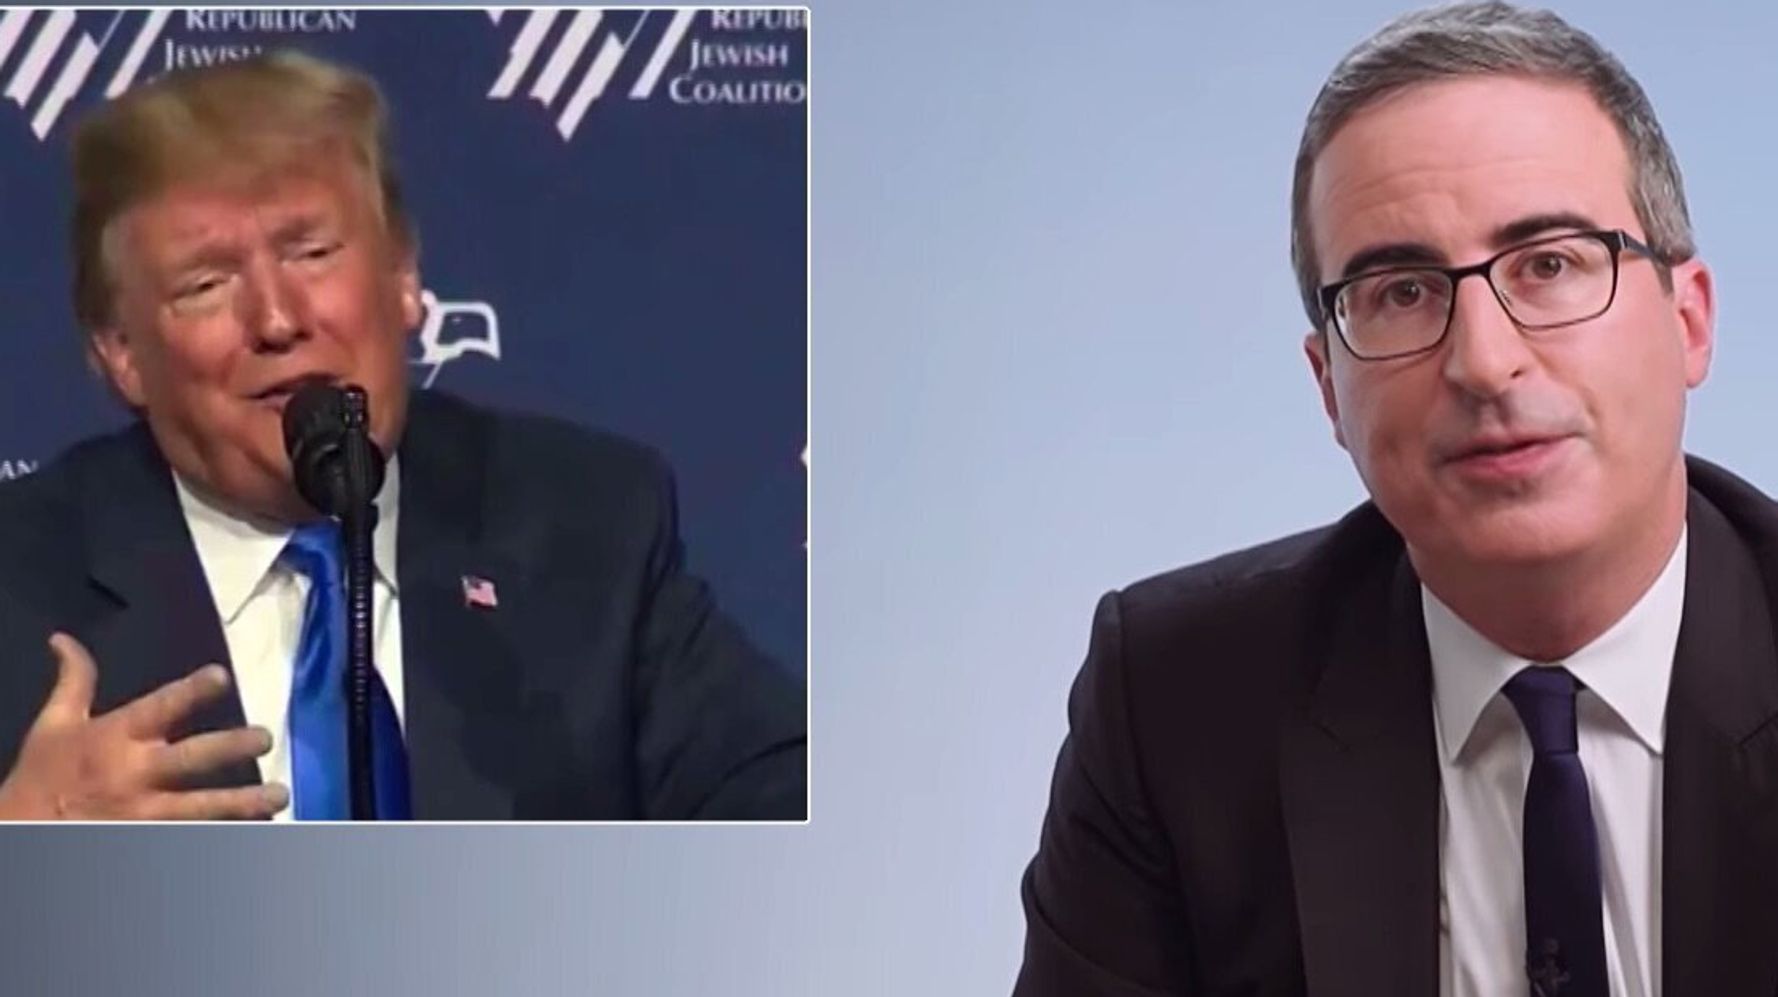 John Oliver Nails The Really Sad Part Of Trump's Final Debate Performance